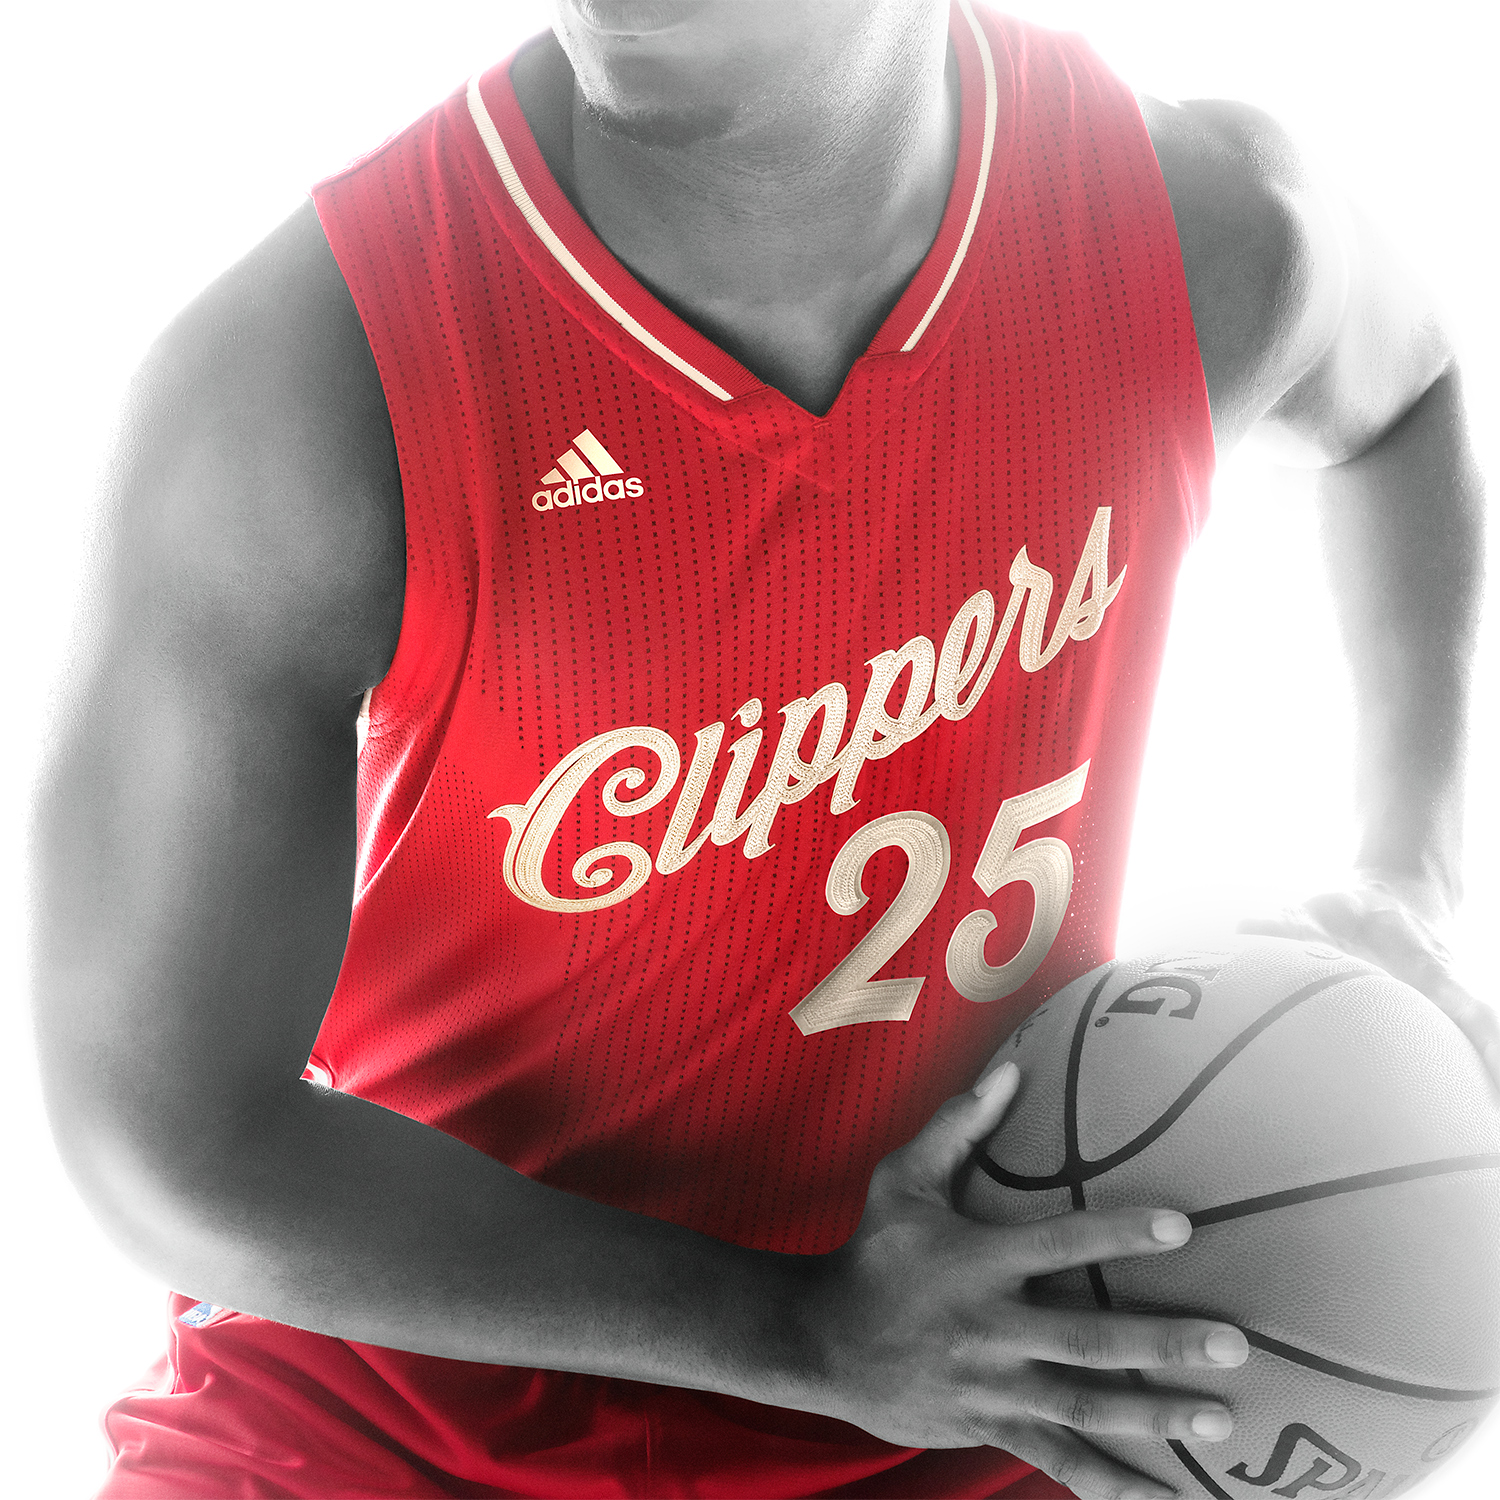 First look: The NBA's new Christmas uniforms are fantastic